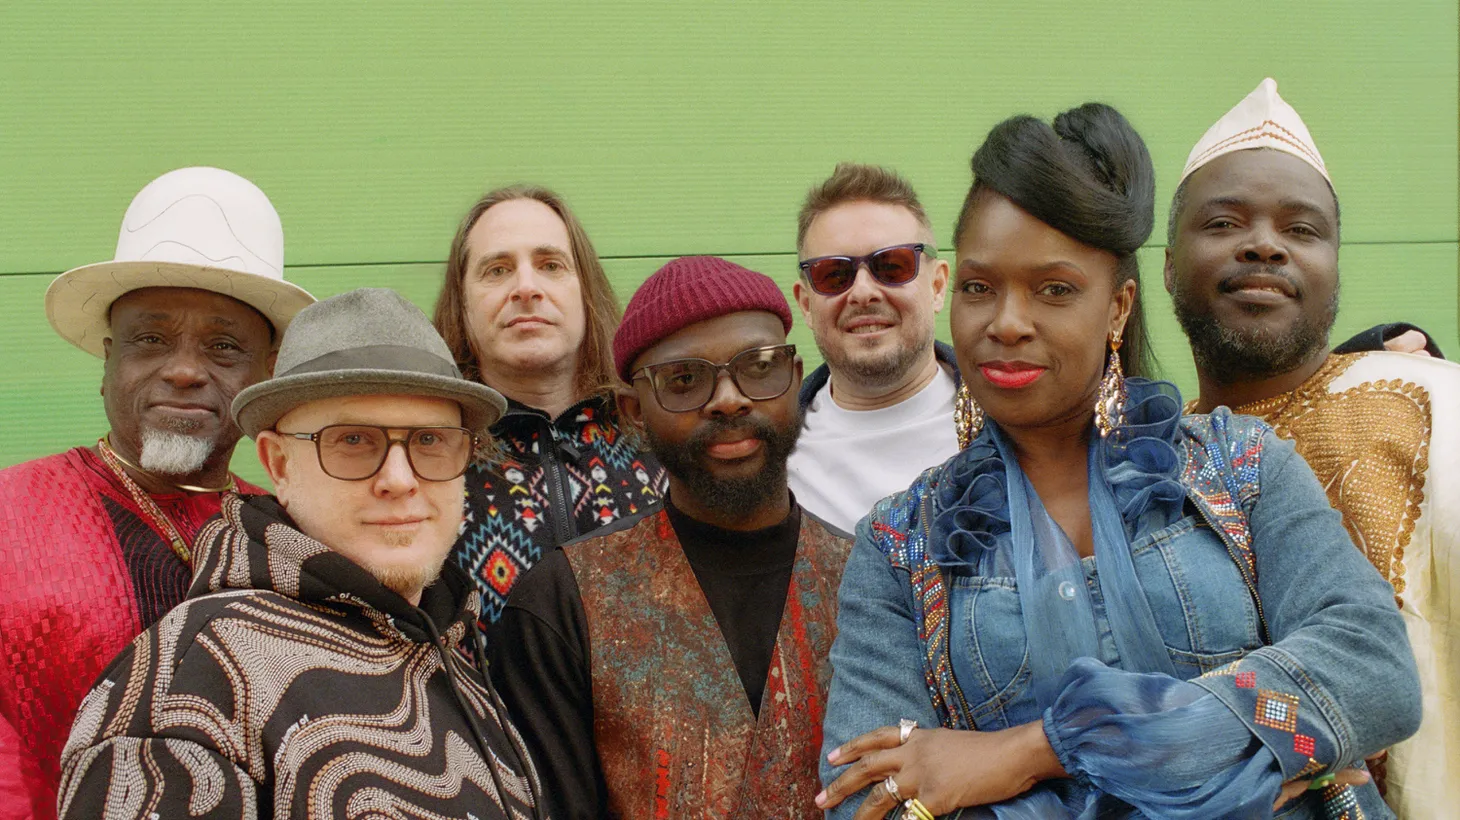 You ready? Let’s “Pull The Rope” and overcome our differences on the dancefloor with Ibibio Sound Machine and their spicy Afrofuturistic grooves on this pulsating, mesmerizing banger. Nuf said!